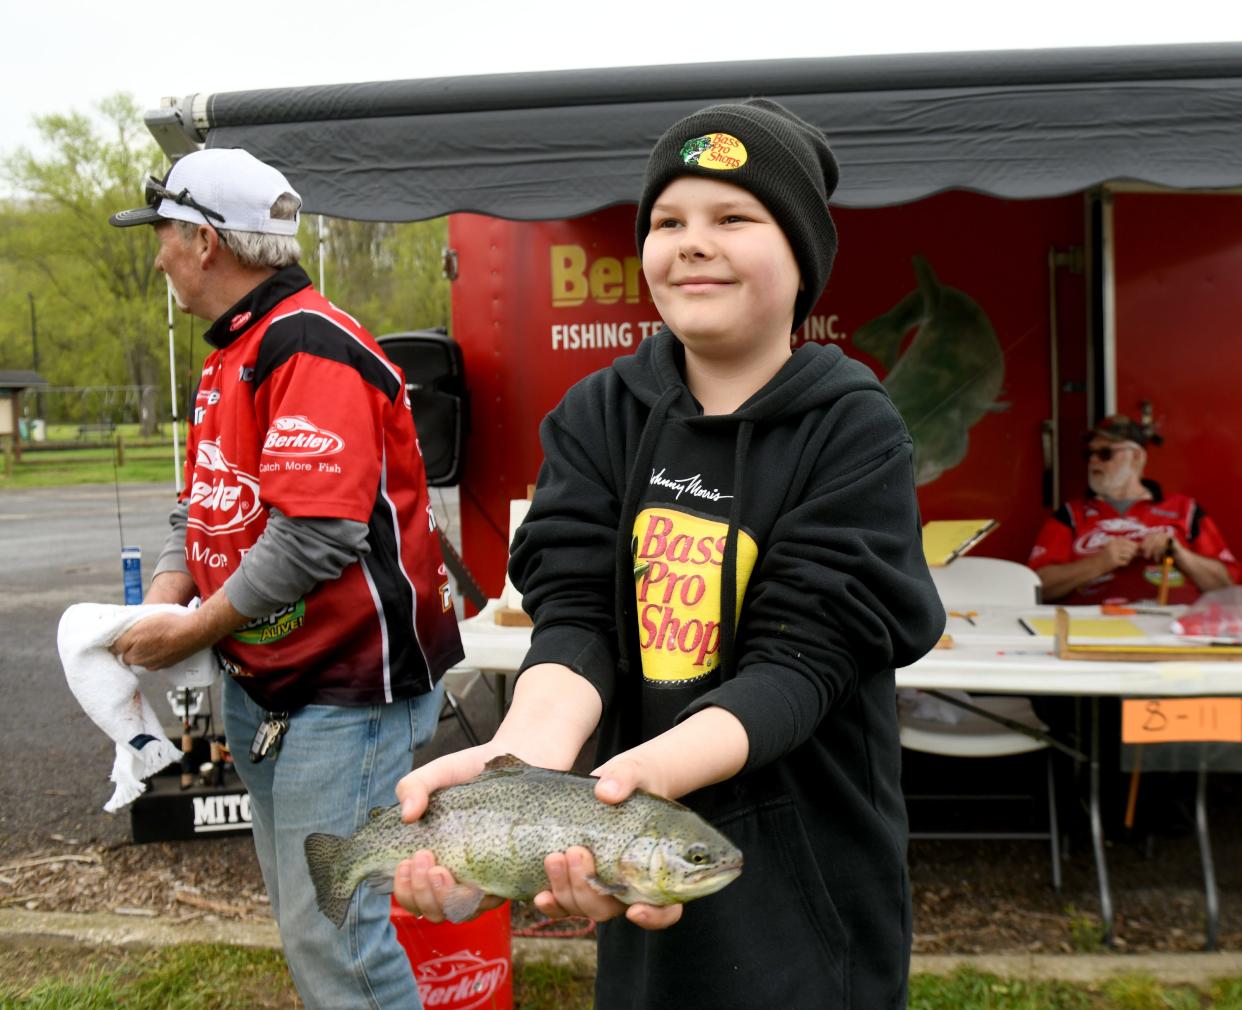 Isaak Jack, 12, of Canal Fulton shows off his catch during The Jack Cullen Towpath Trail Trout Derby at St. Helena Heritage Park in Canal Fulton.